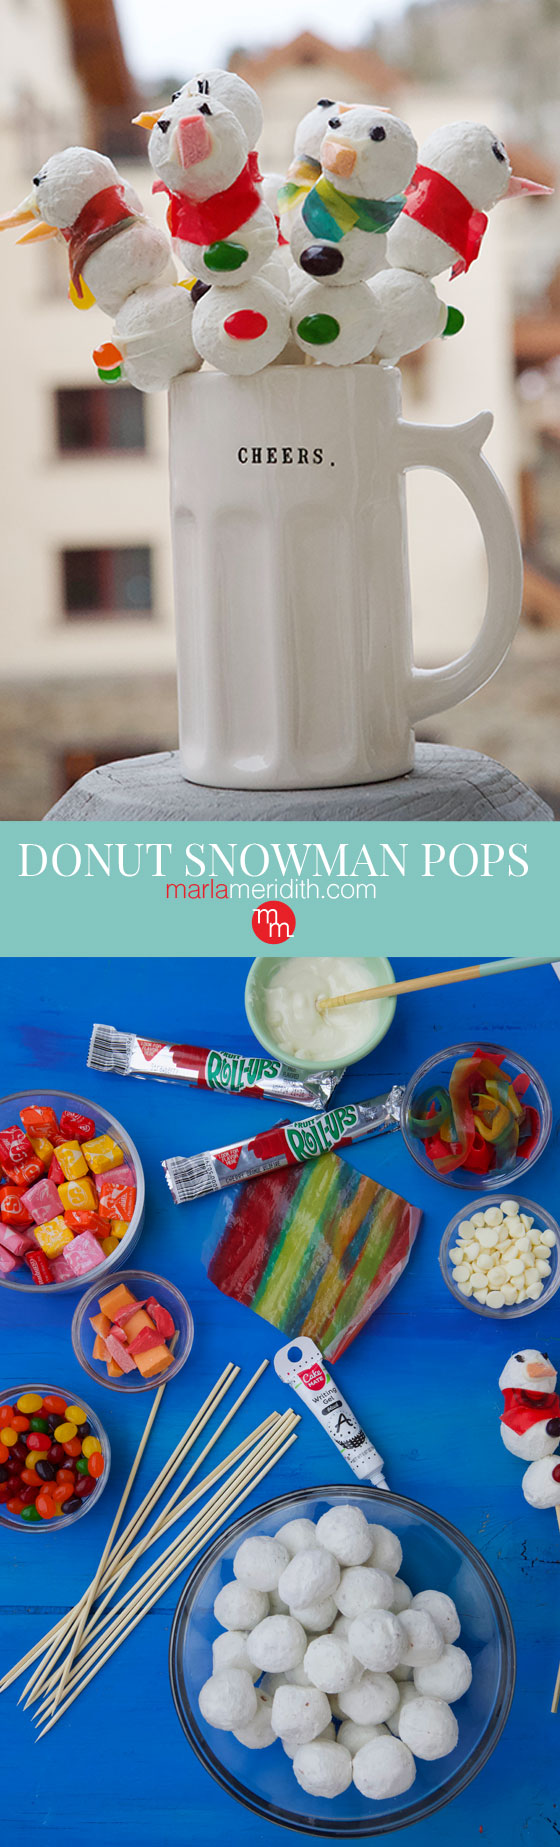 How cute are these Donut Snowman Pops? A simple holiday edible craft you can make with the kids. Ingredients are easy to find and these come together quickly for any winter celebration. MarlaMeridith.com